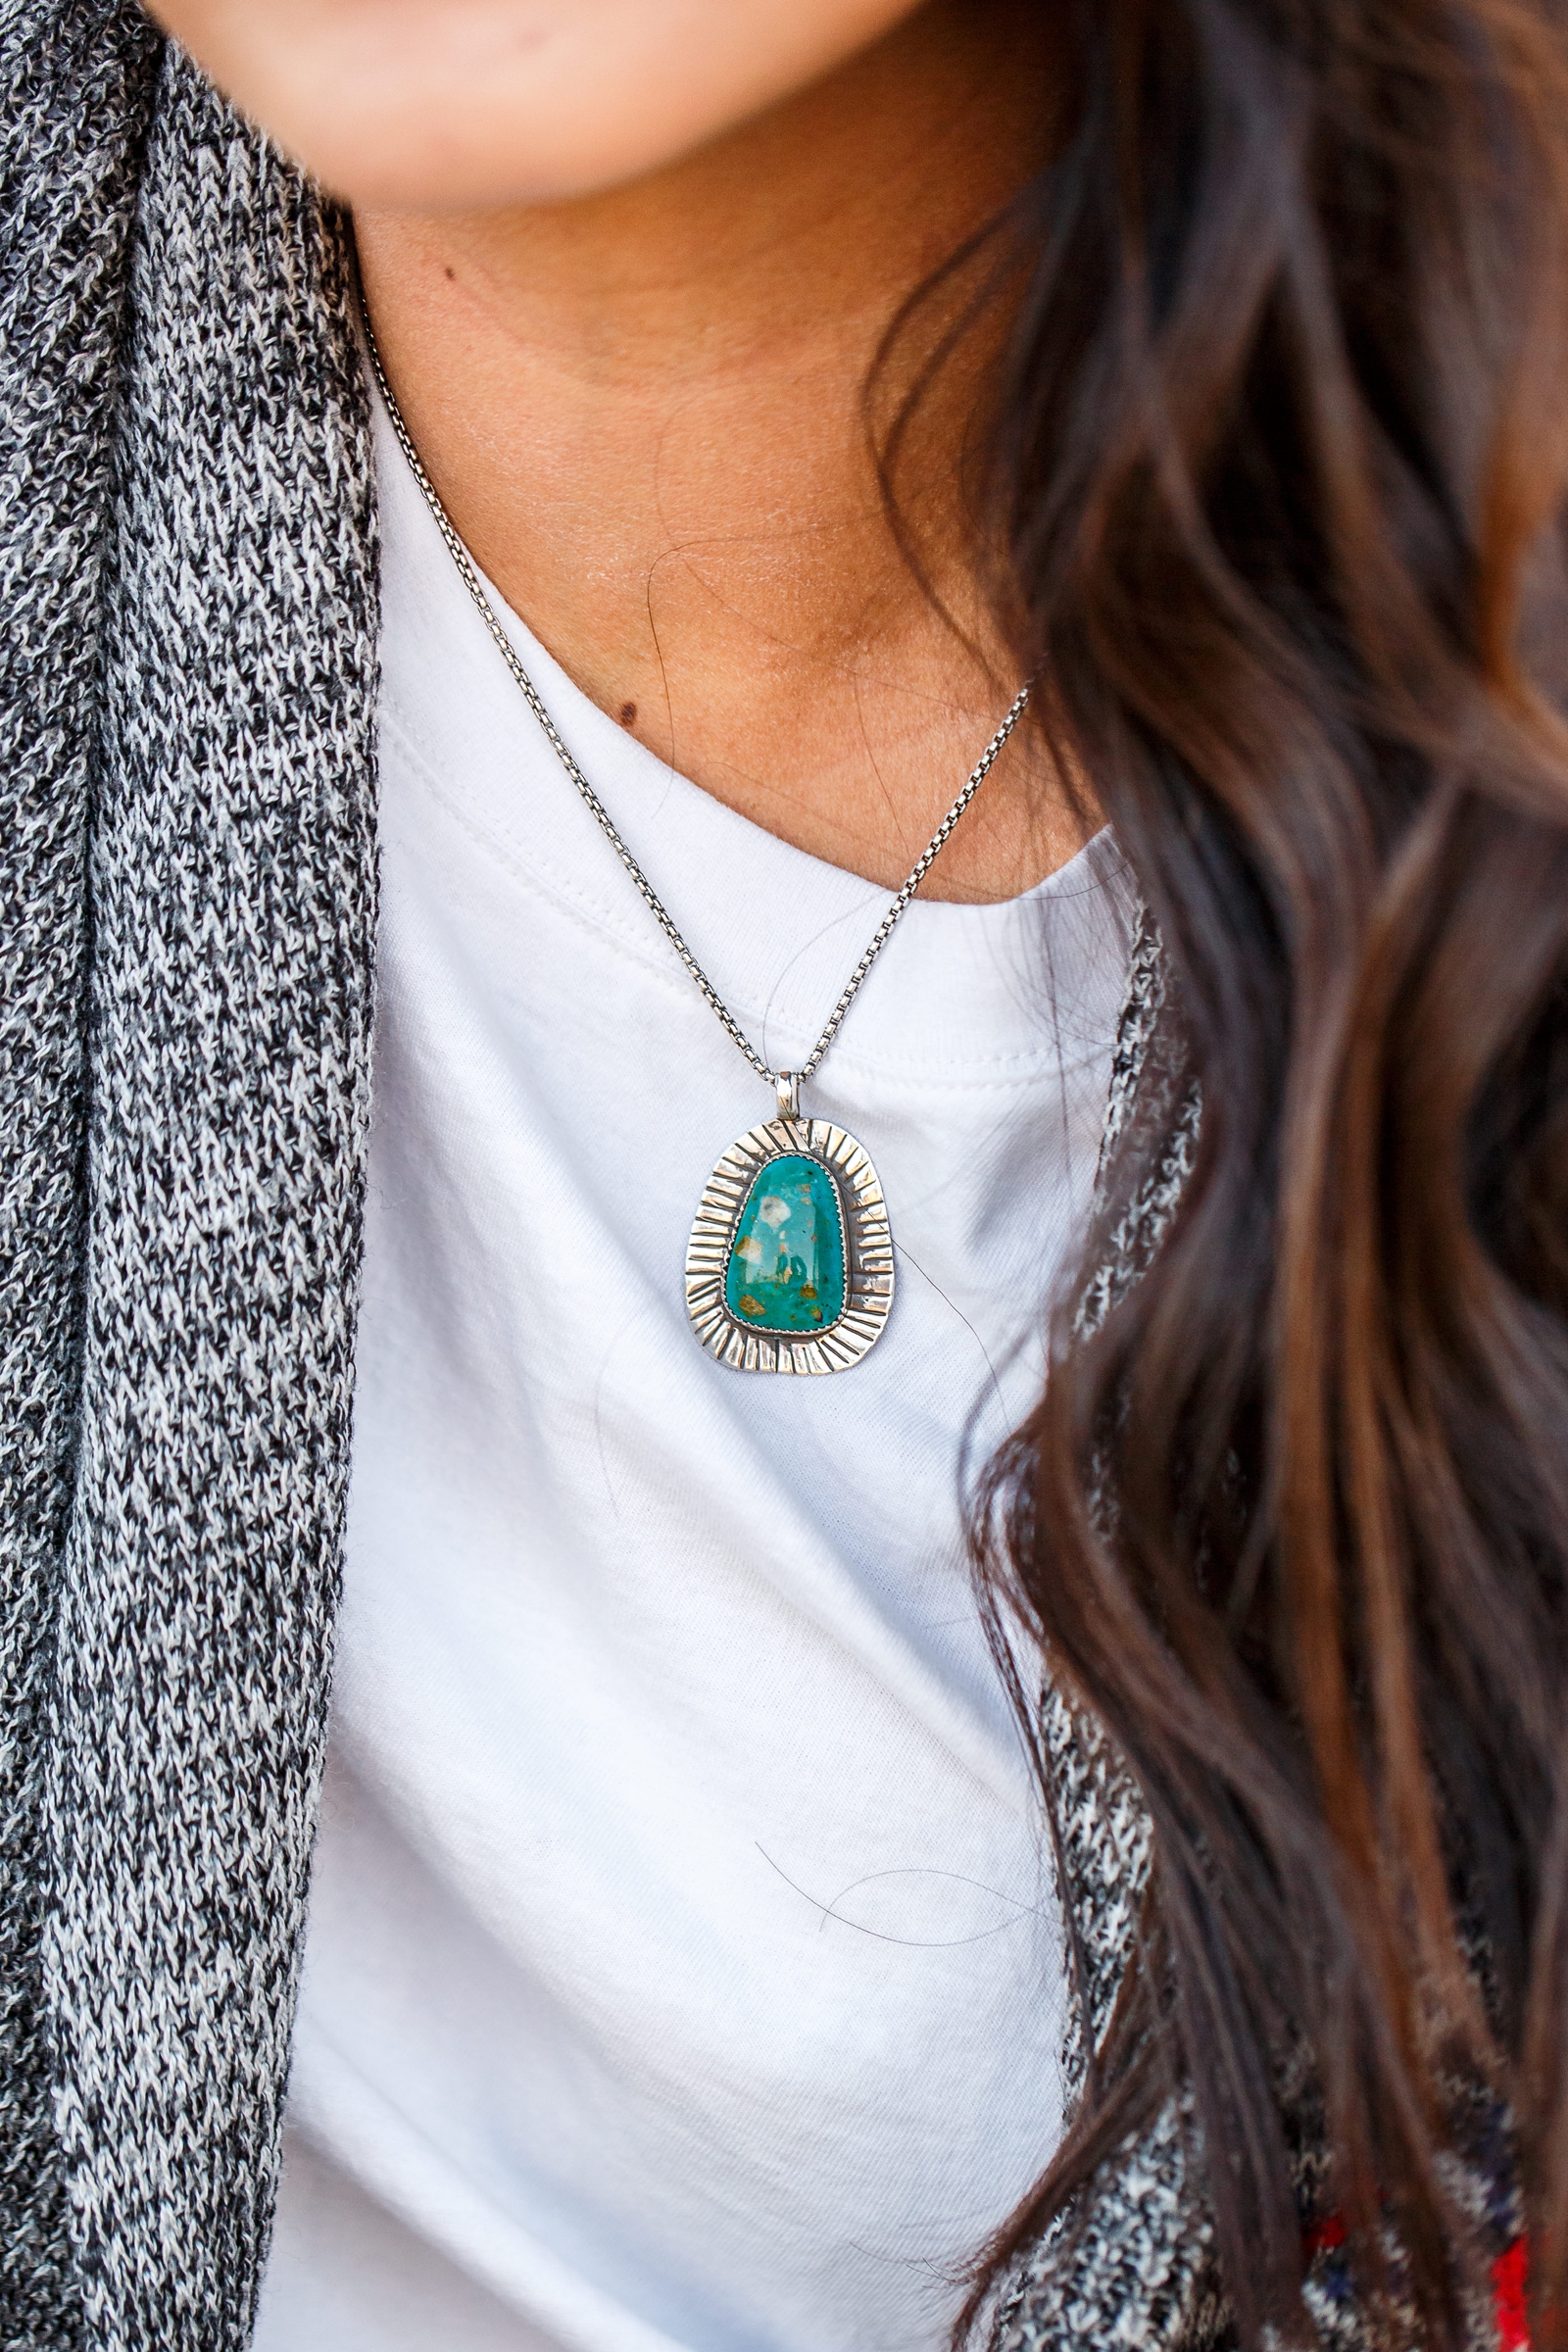 Handmade turquoise necklace at this couple's Joshua Tree engagement session.